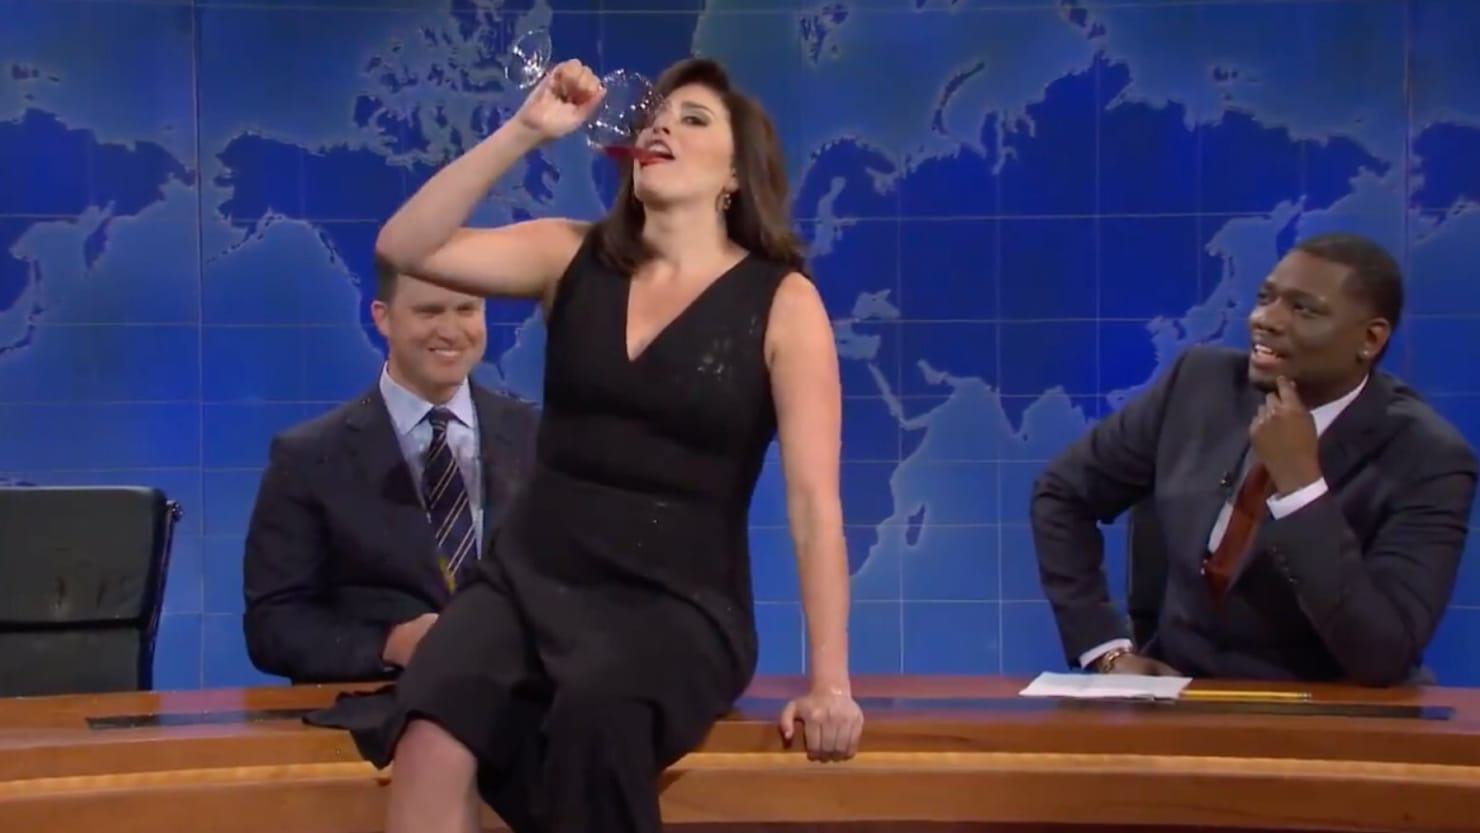 Cecily Strong Pussy - Cecily Strong's Jeanine Pirro Chugs Wine, Belts 'My Way' on 'SNL'